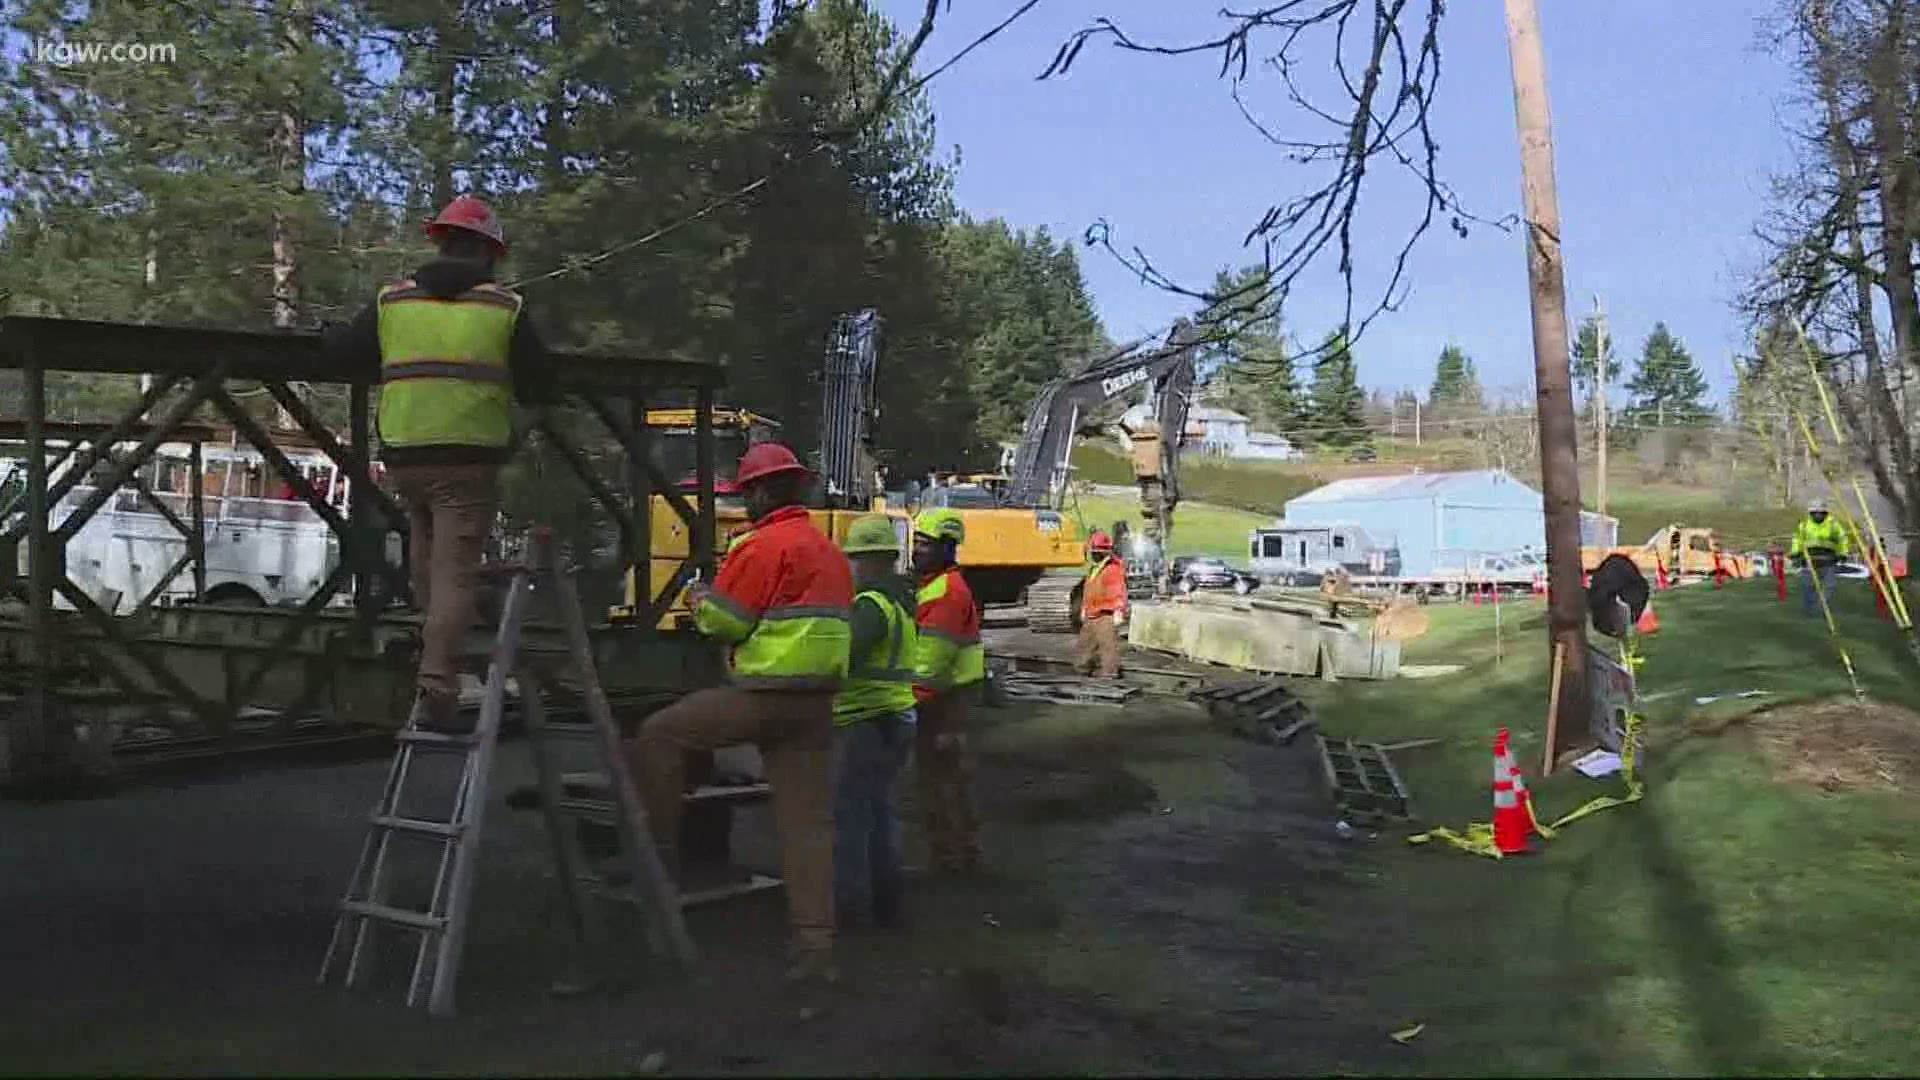 ODOT installed an emergency bridge in the community of Damascus after a sinkhole trapped some residents in their neighborhood.